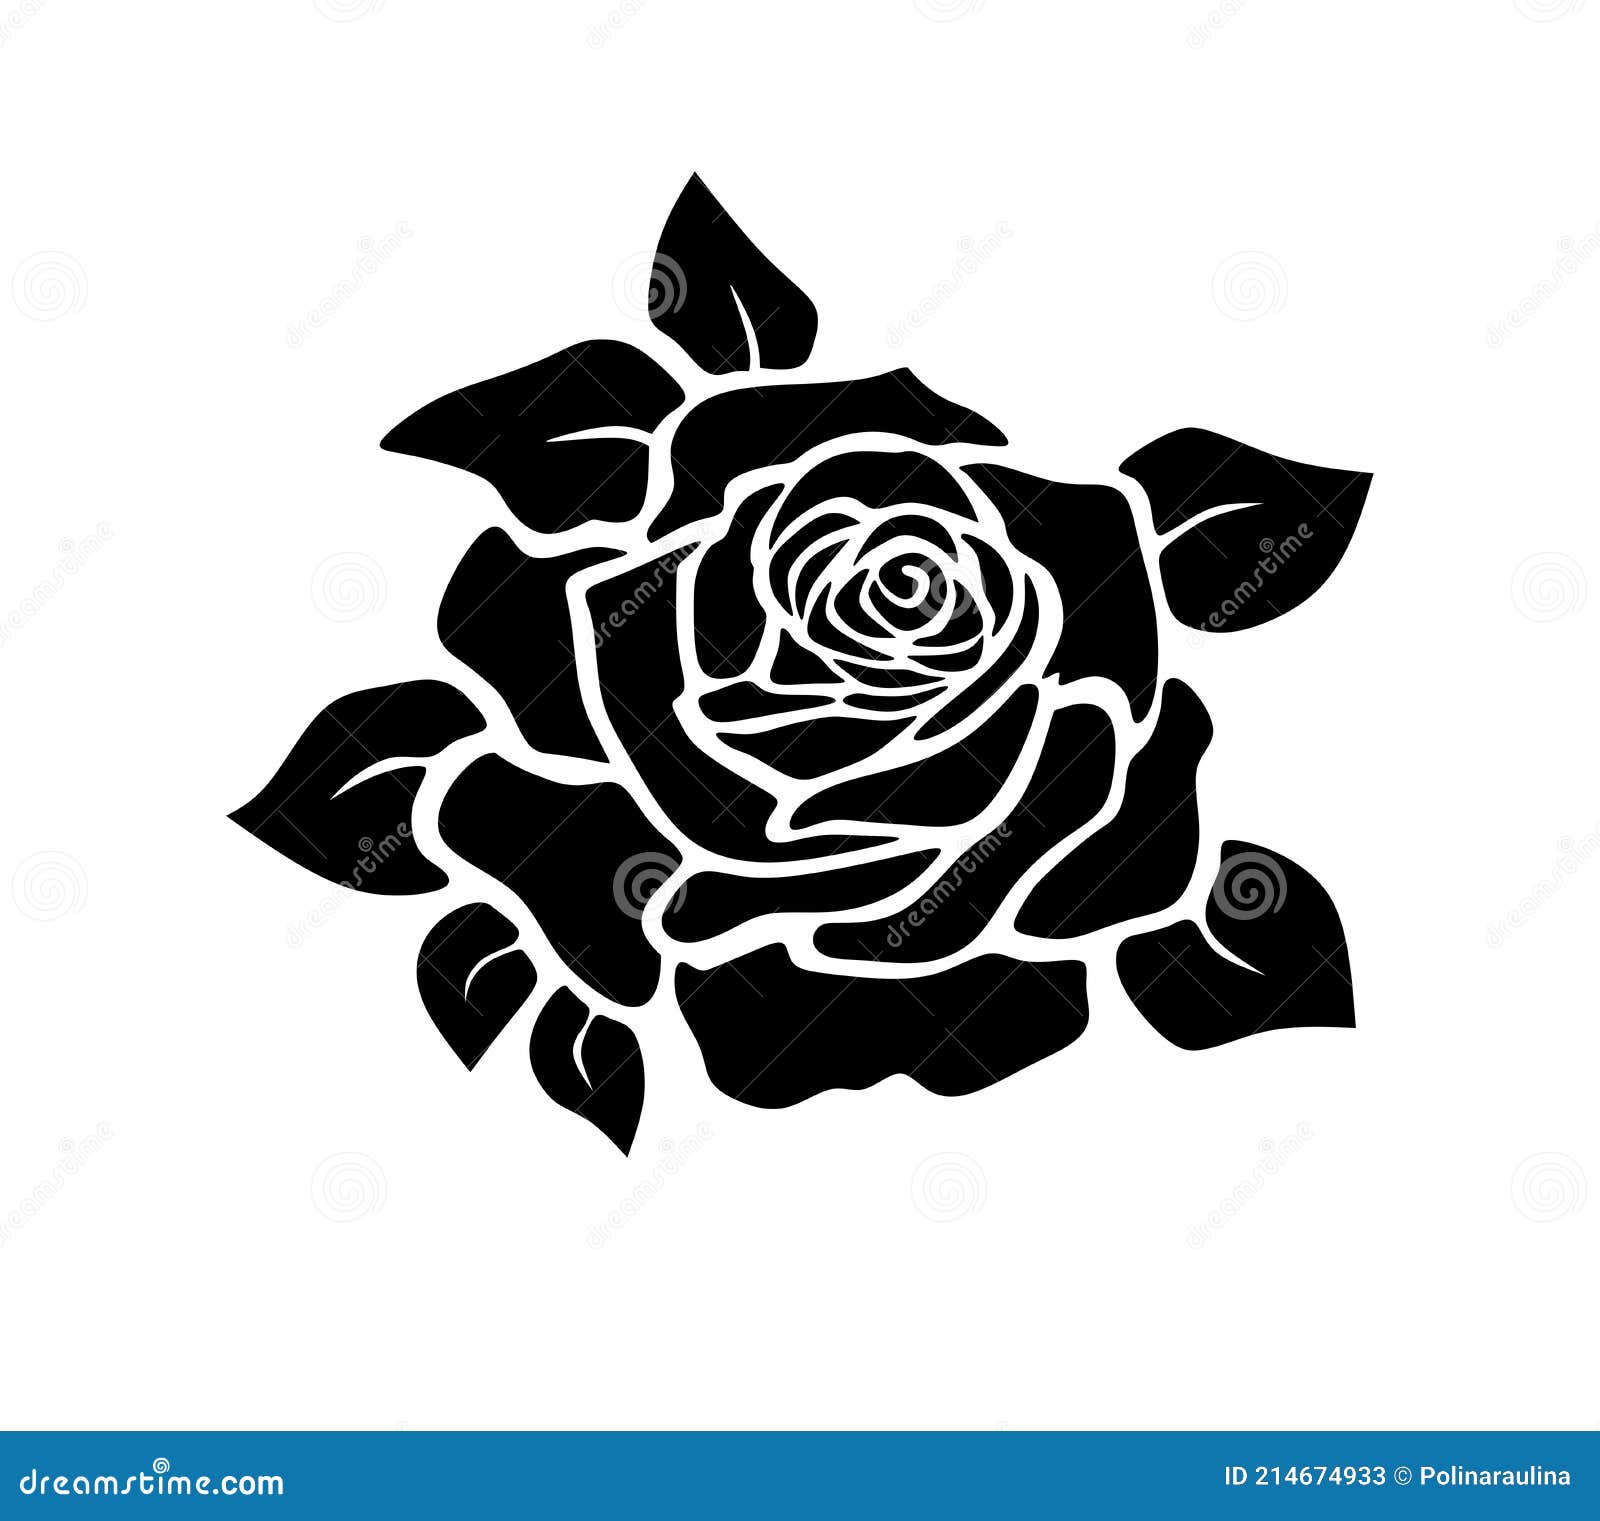 Rose Flower Silhouette Stencil Drawing Stock Vector - Illustration of ...